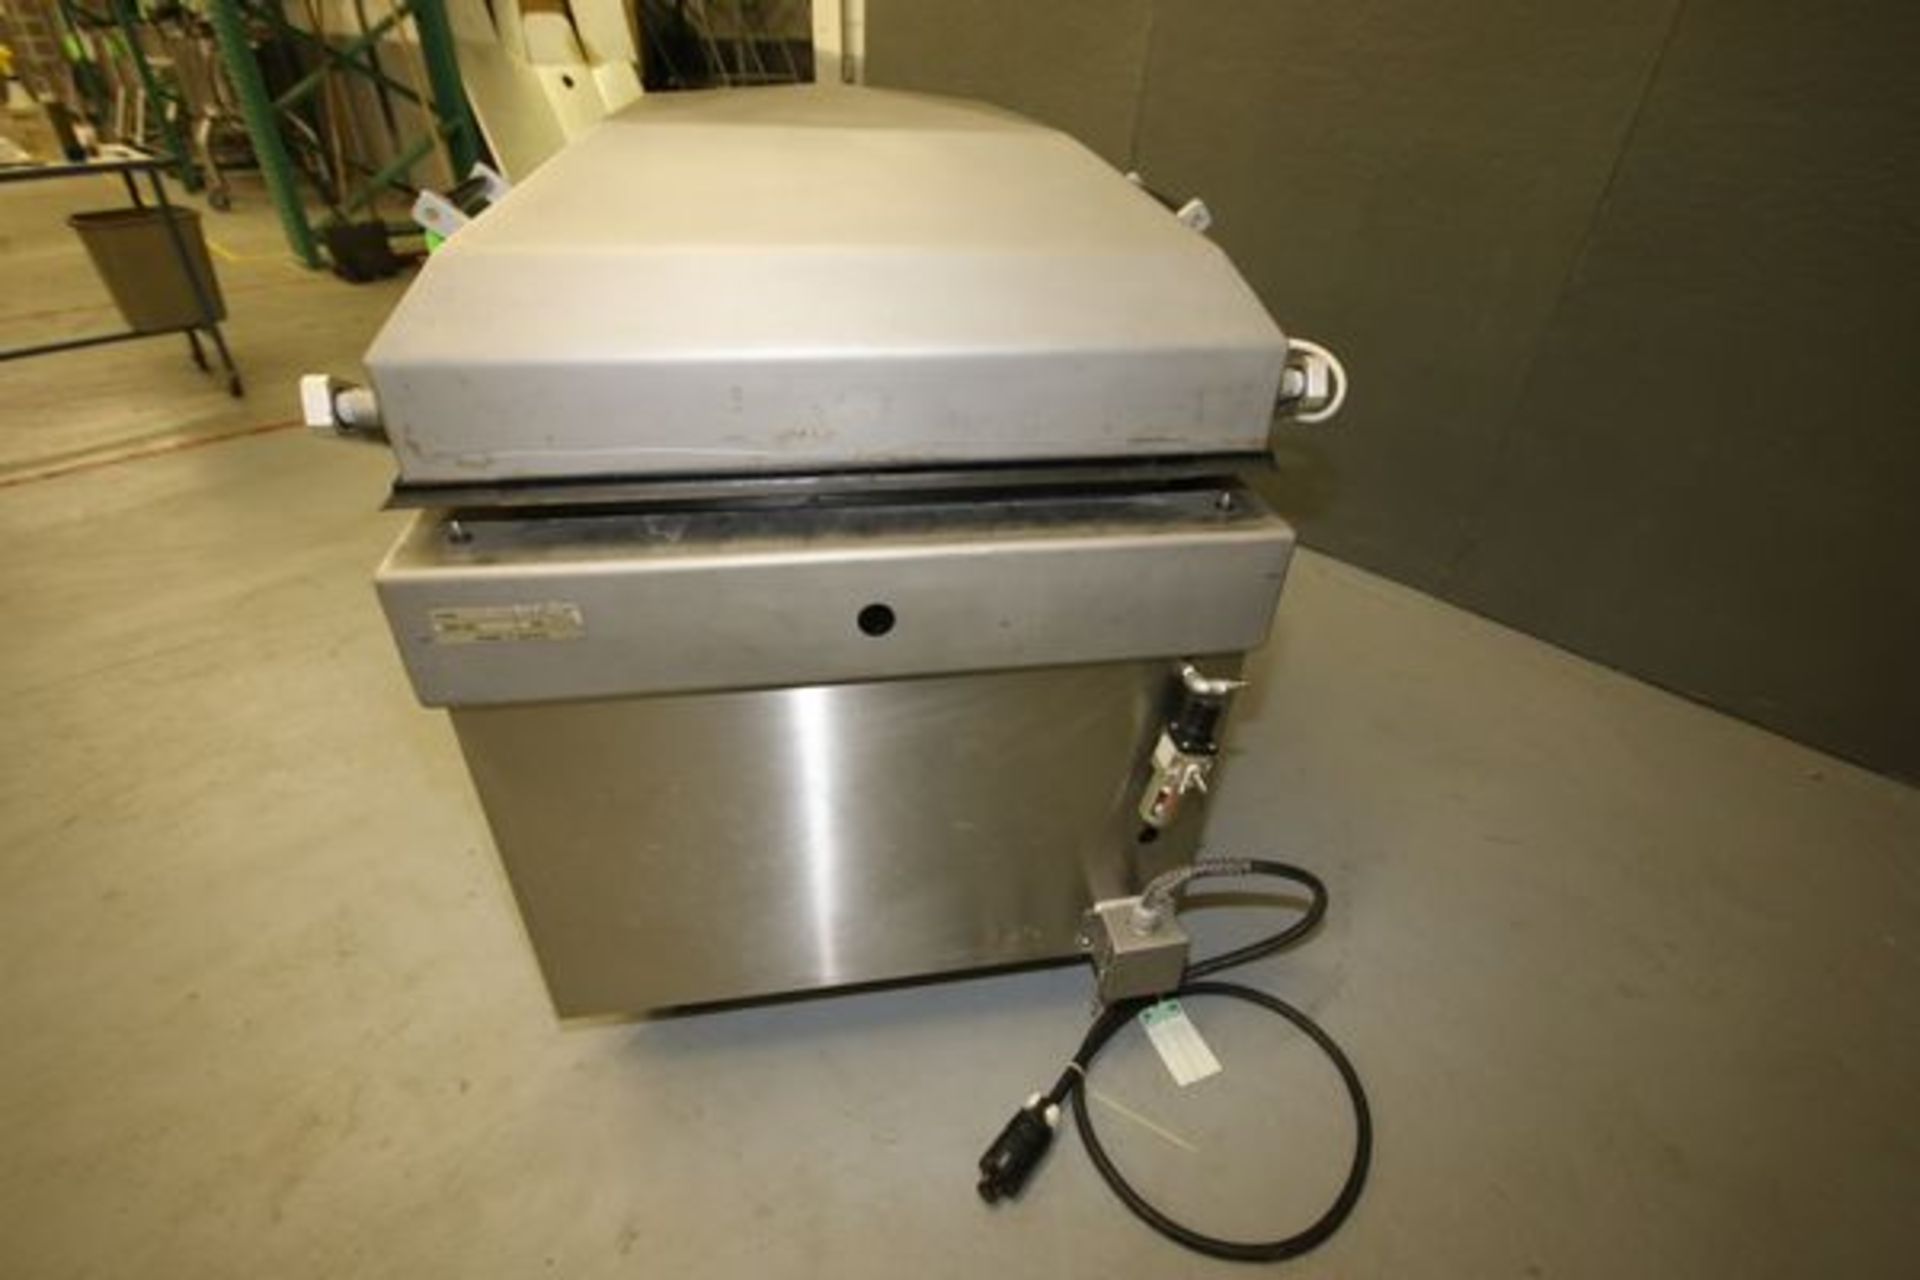 Smith SuperVac Dual Vacuum Sealer, Type GK290 with Seal Platform Dimension: Aprox. 24" x 24", 460 - Image 7 of 8